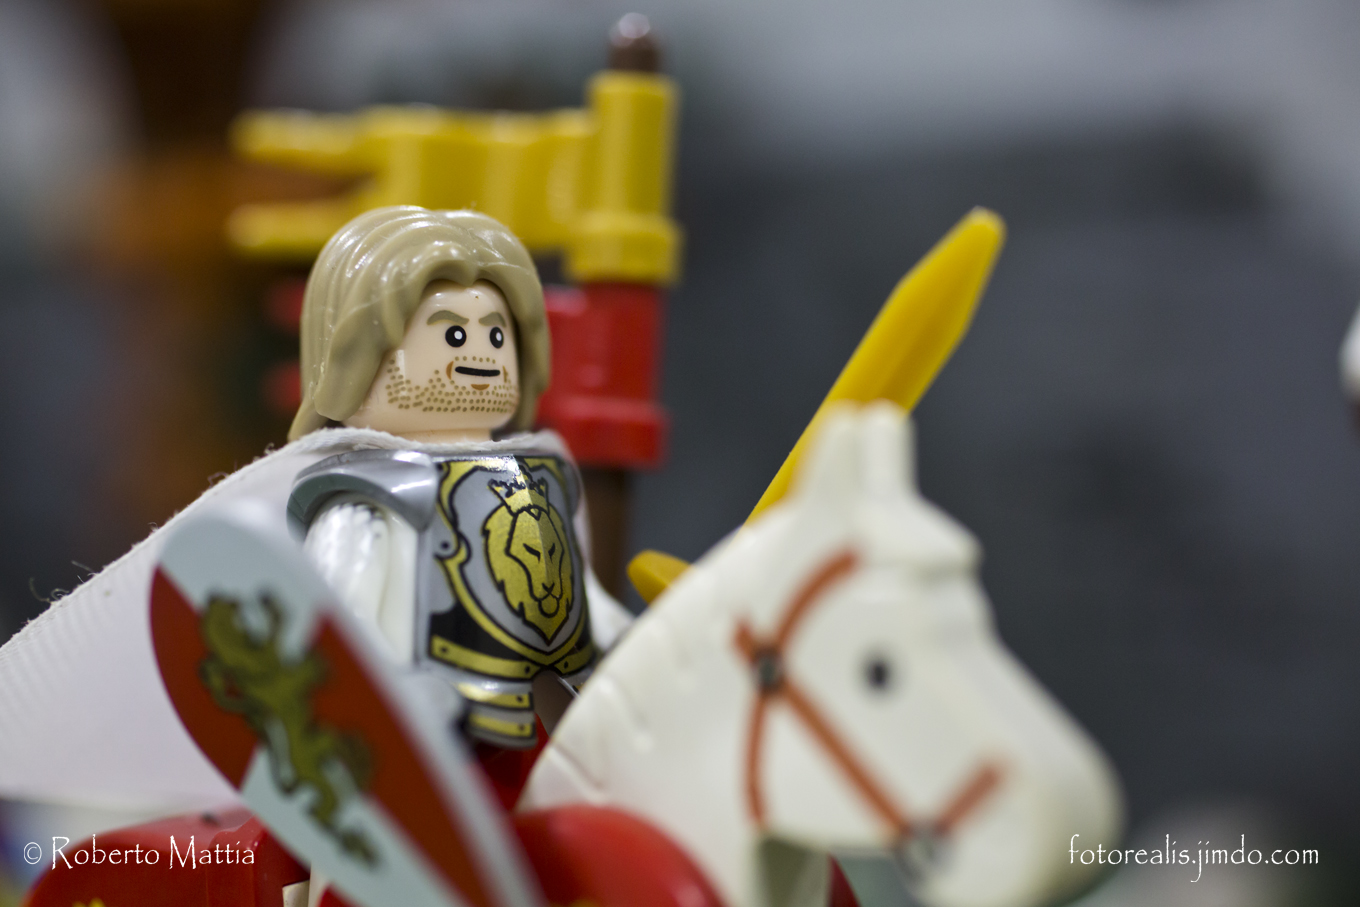 Lego model from chivalrous soul...